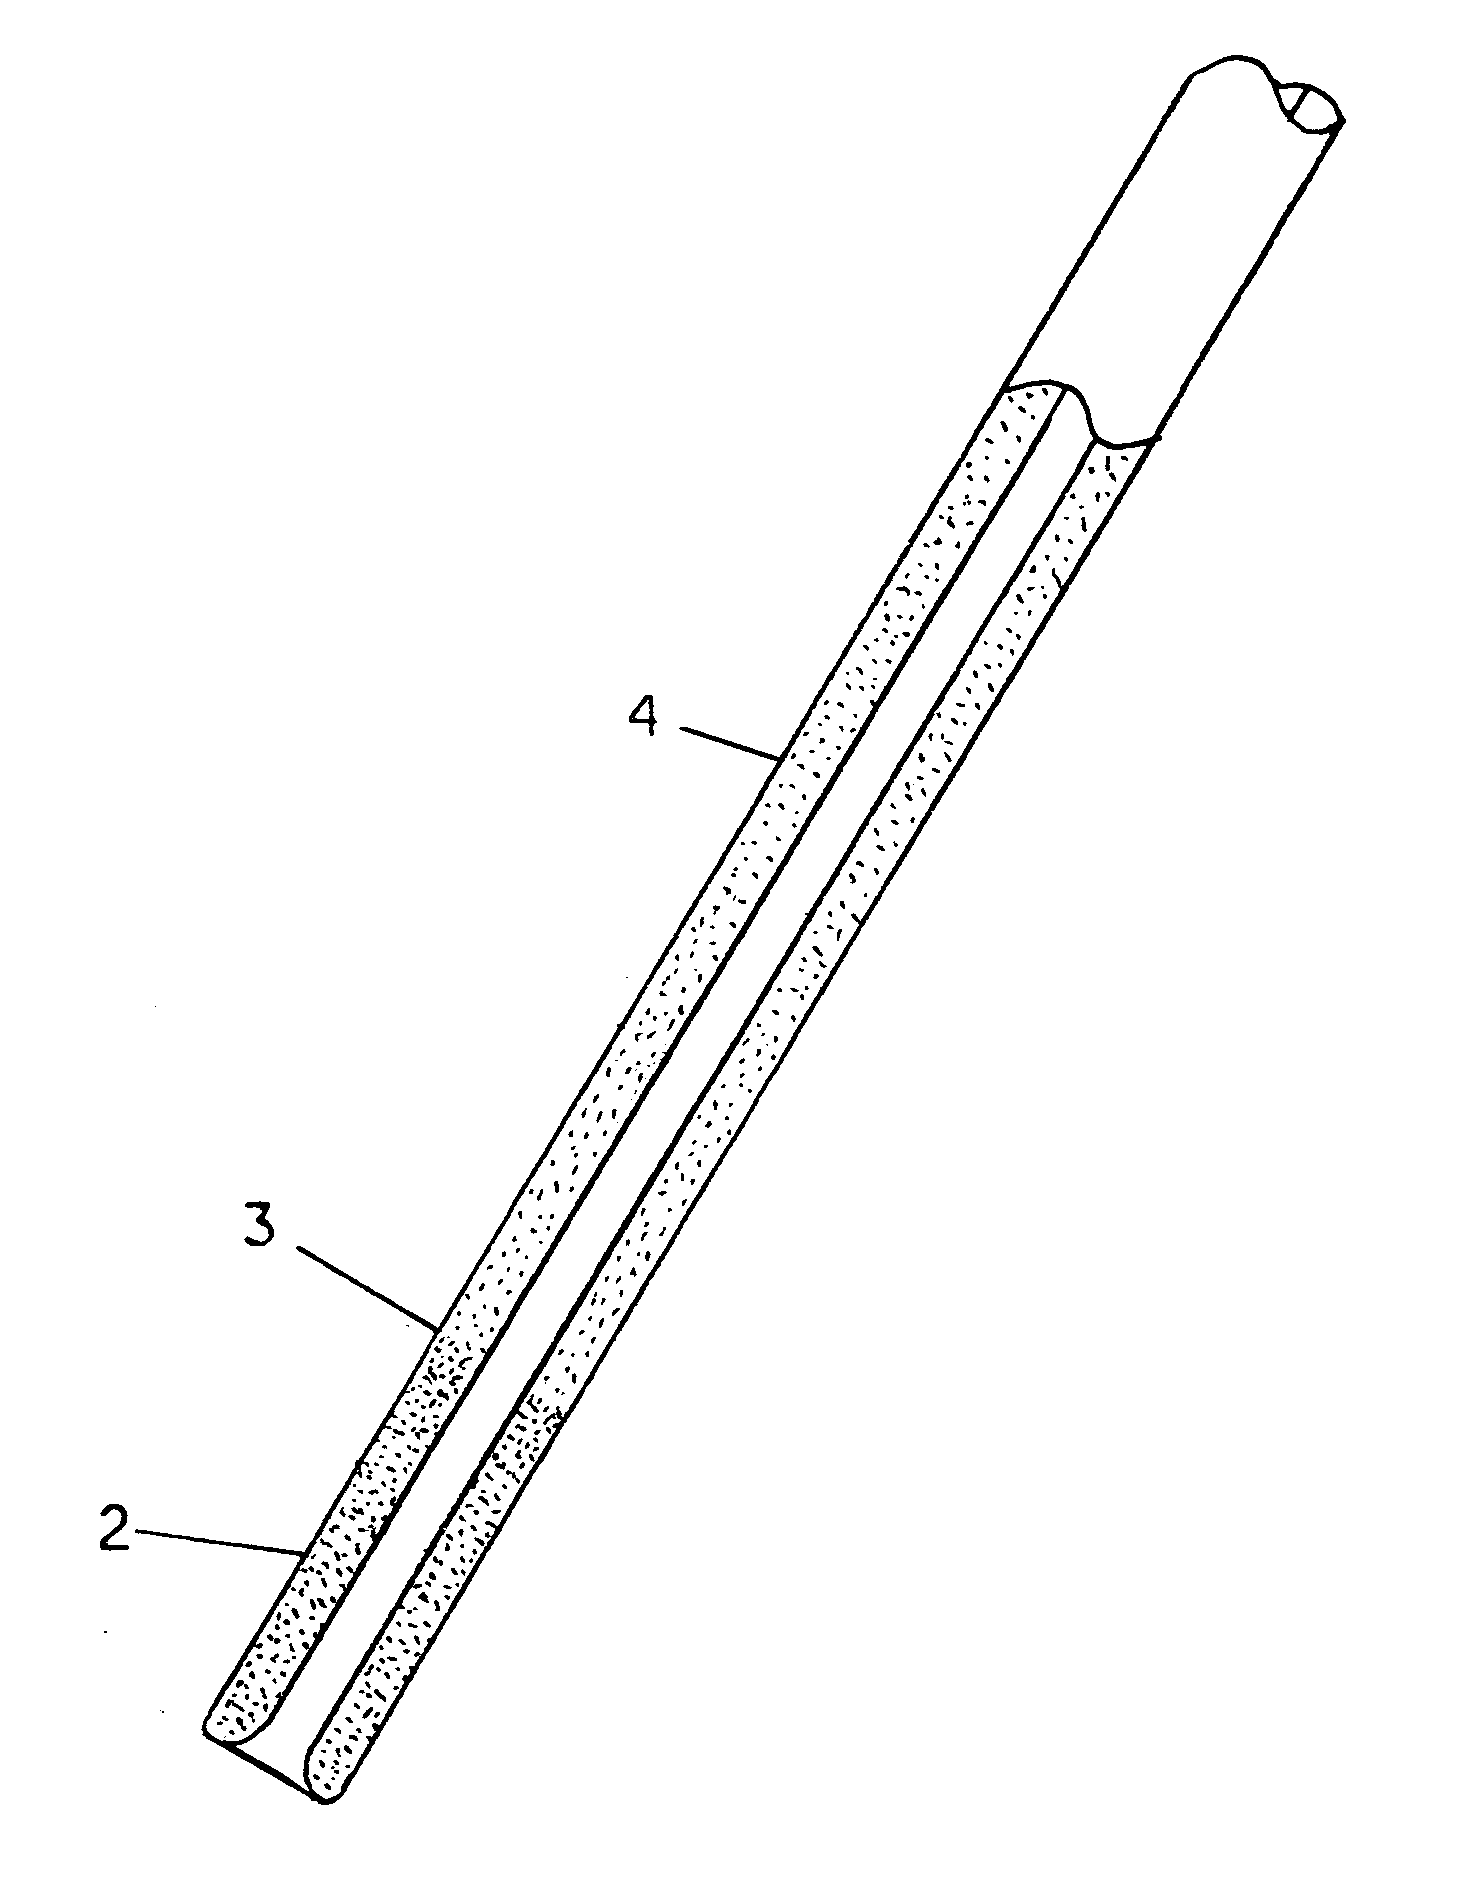 Vibrating, magnetically guidable catheter with magnetic powder commingled with resin, extruded as an integral part the catheter